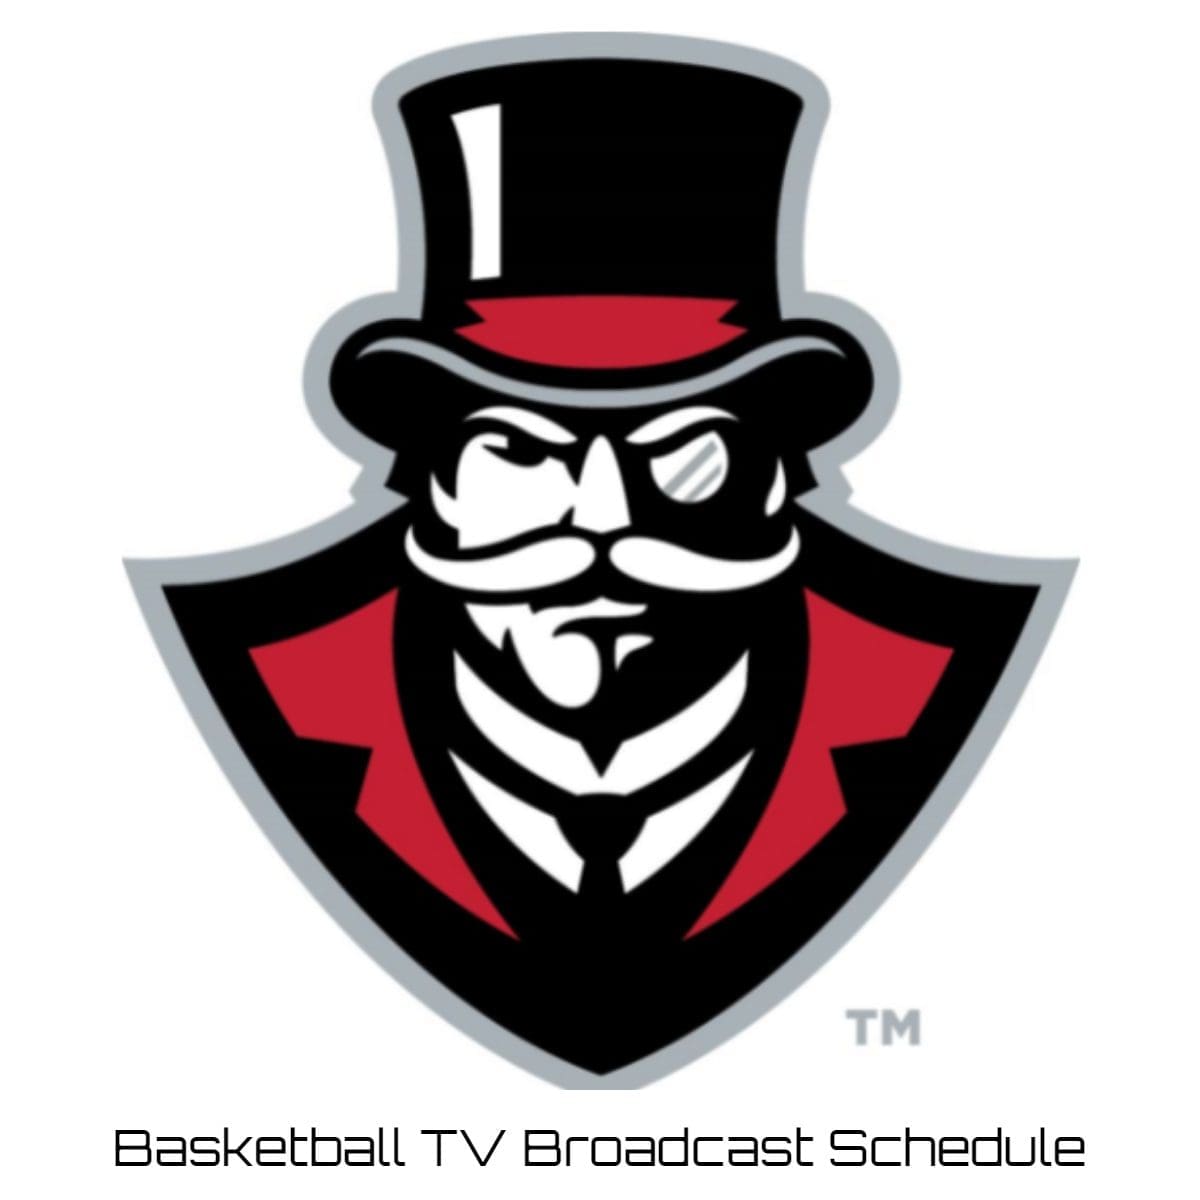 Austin Peay Governors Basketball TV Broadcast Schedule